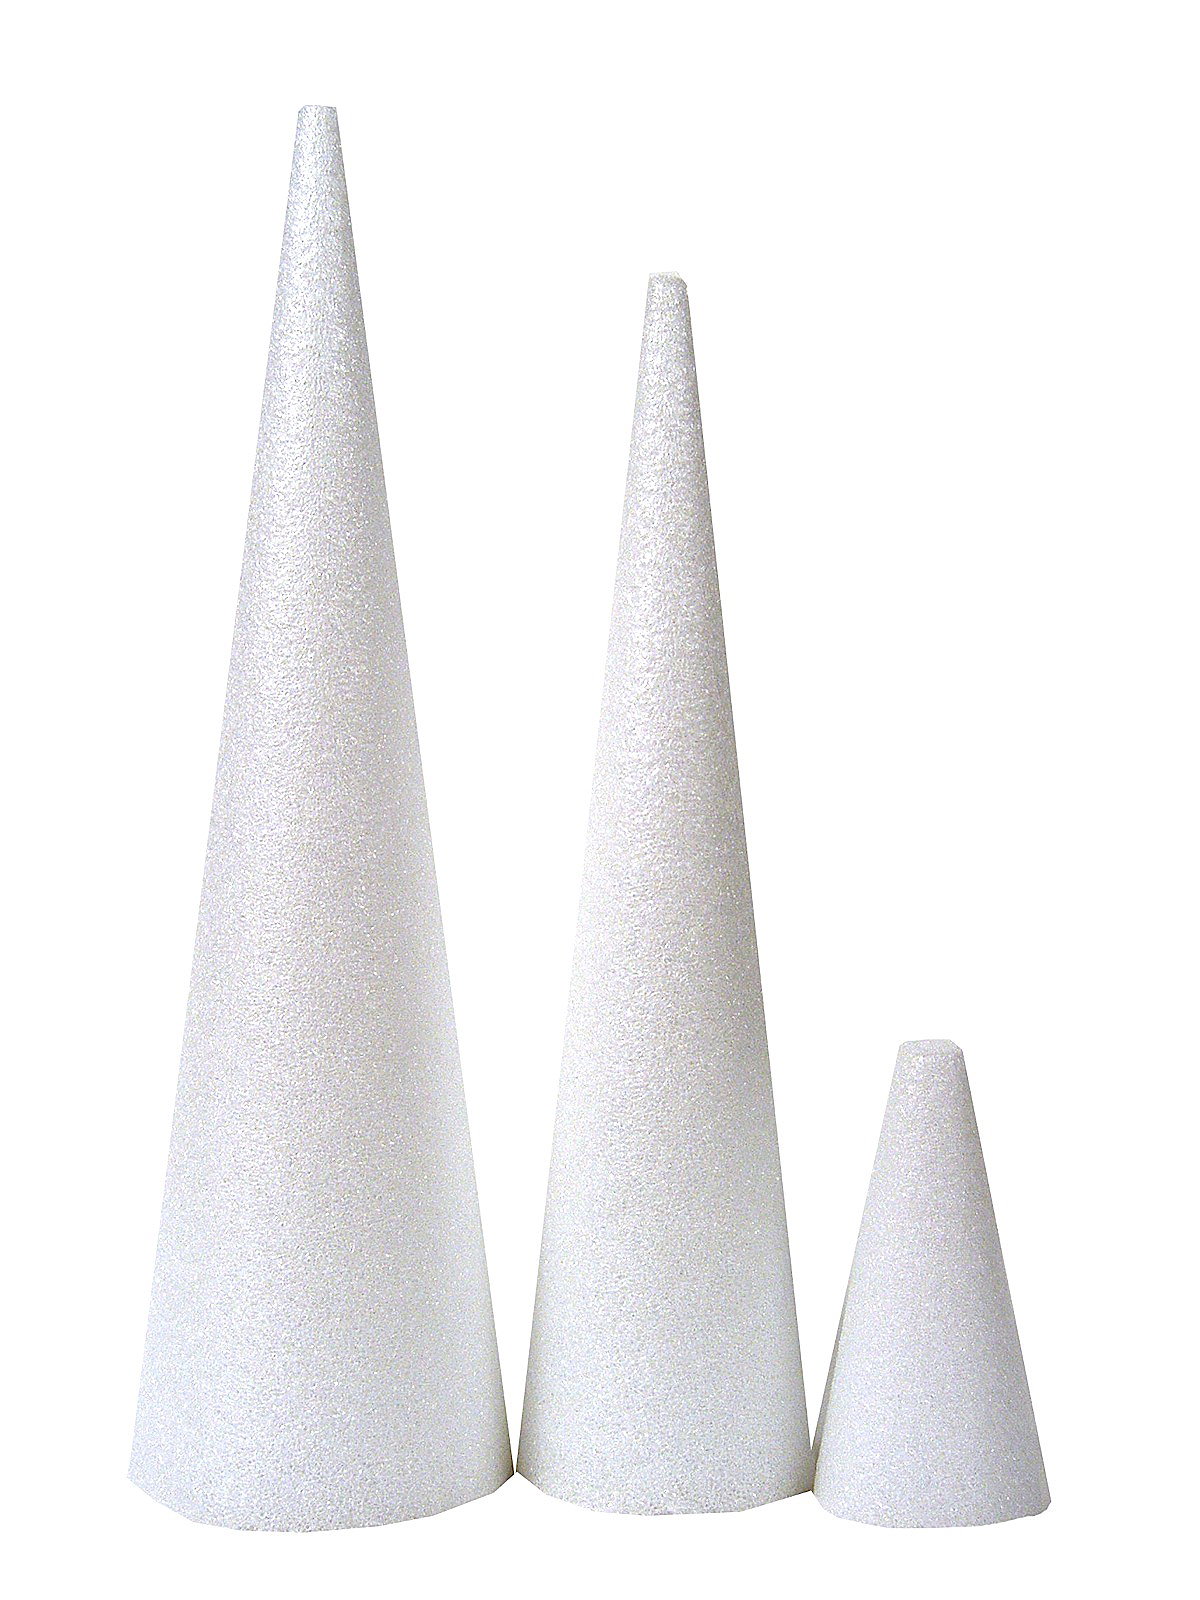 FloraCraft 4-Inch-by-2 1/2-Inch Packaged Styrofoam Cones, White